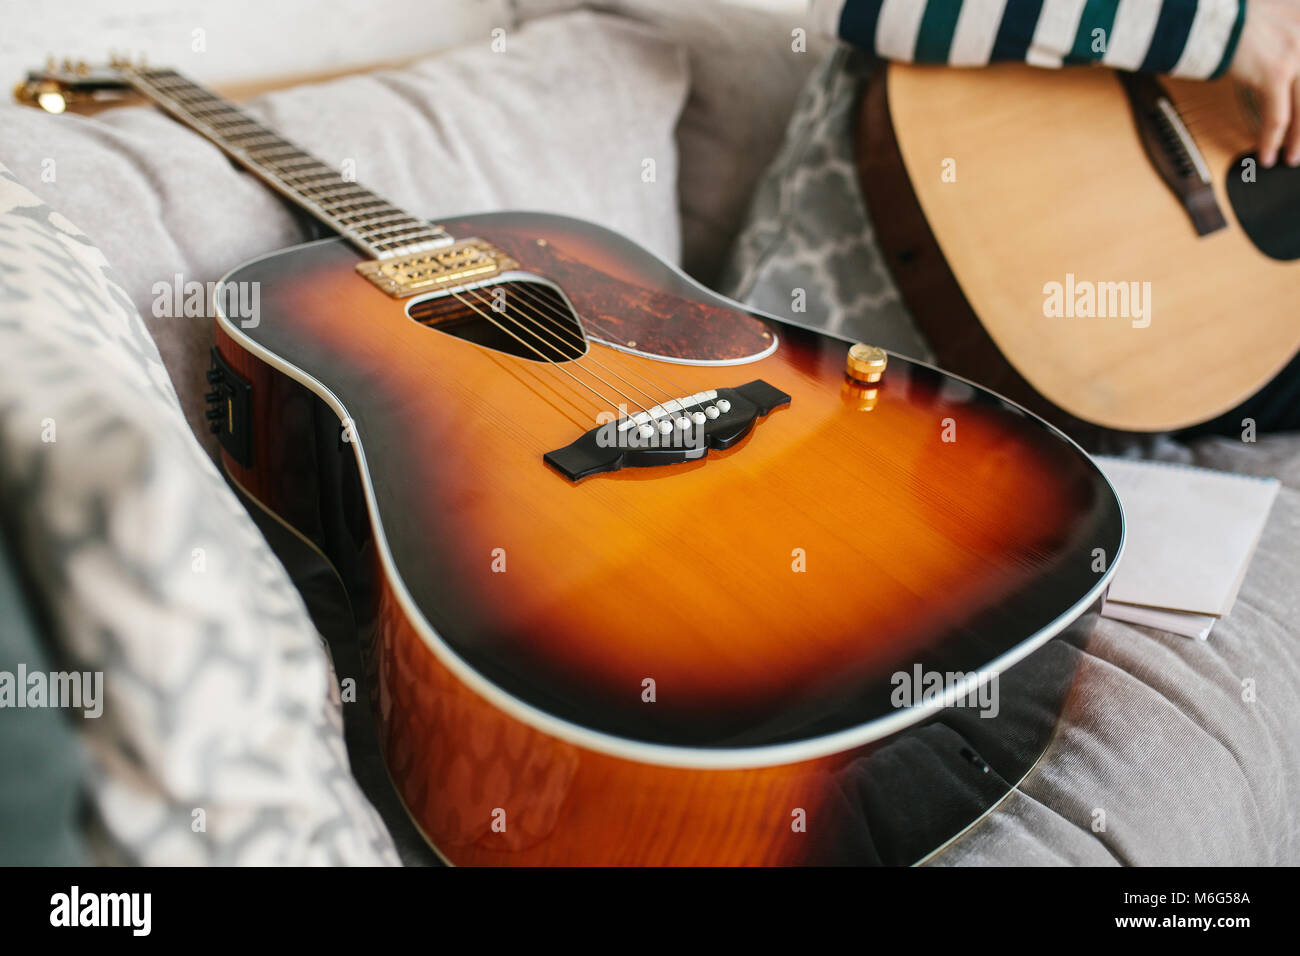 Learning to play the guitar. Music education. Stock Photo